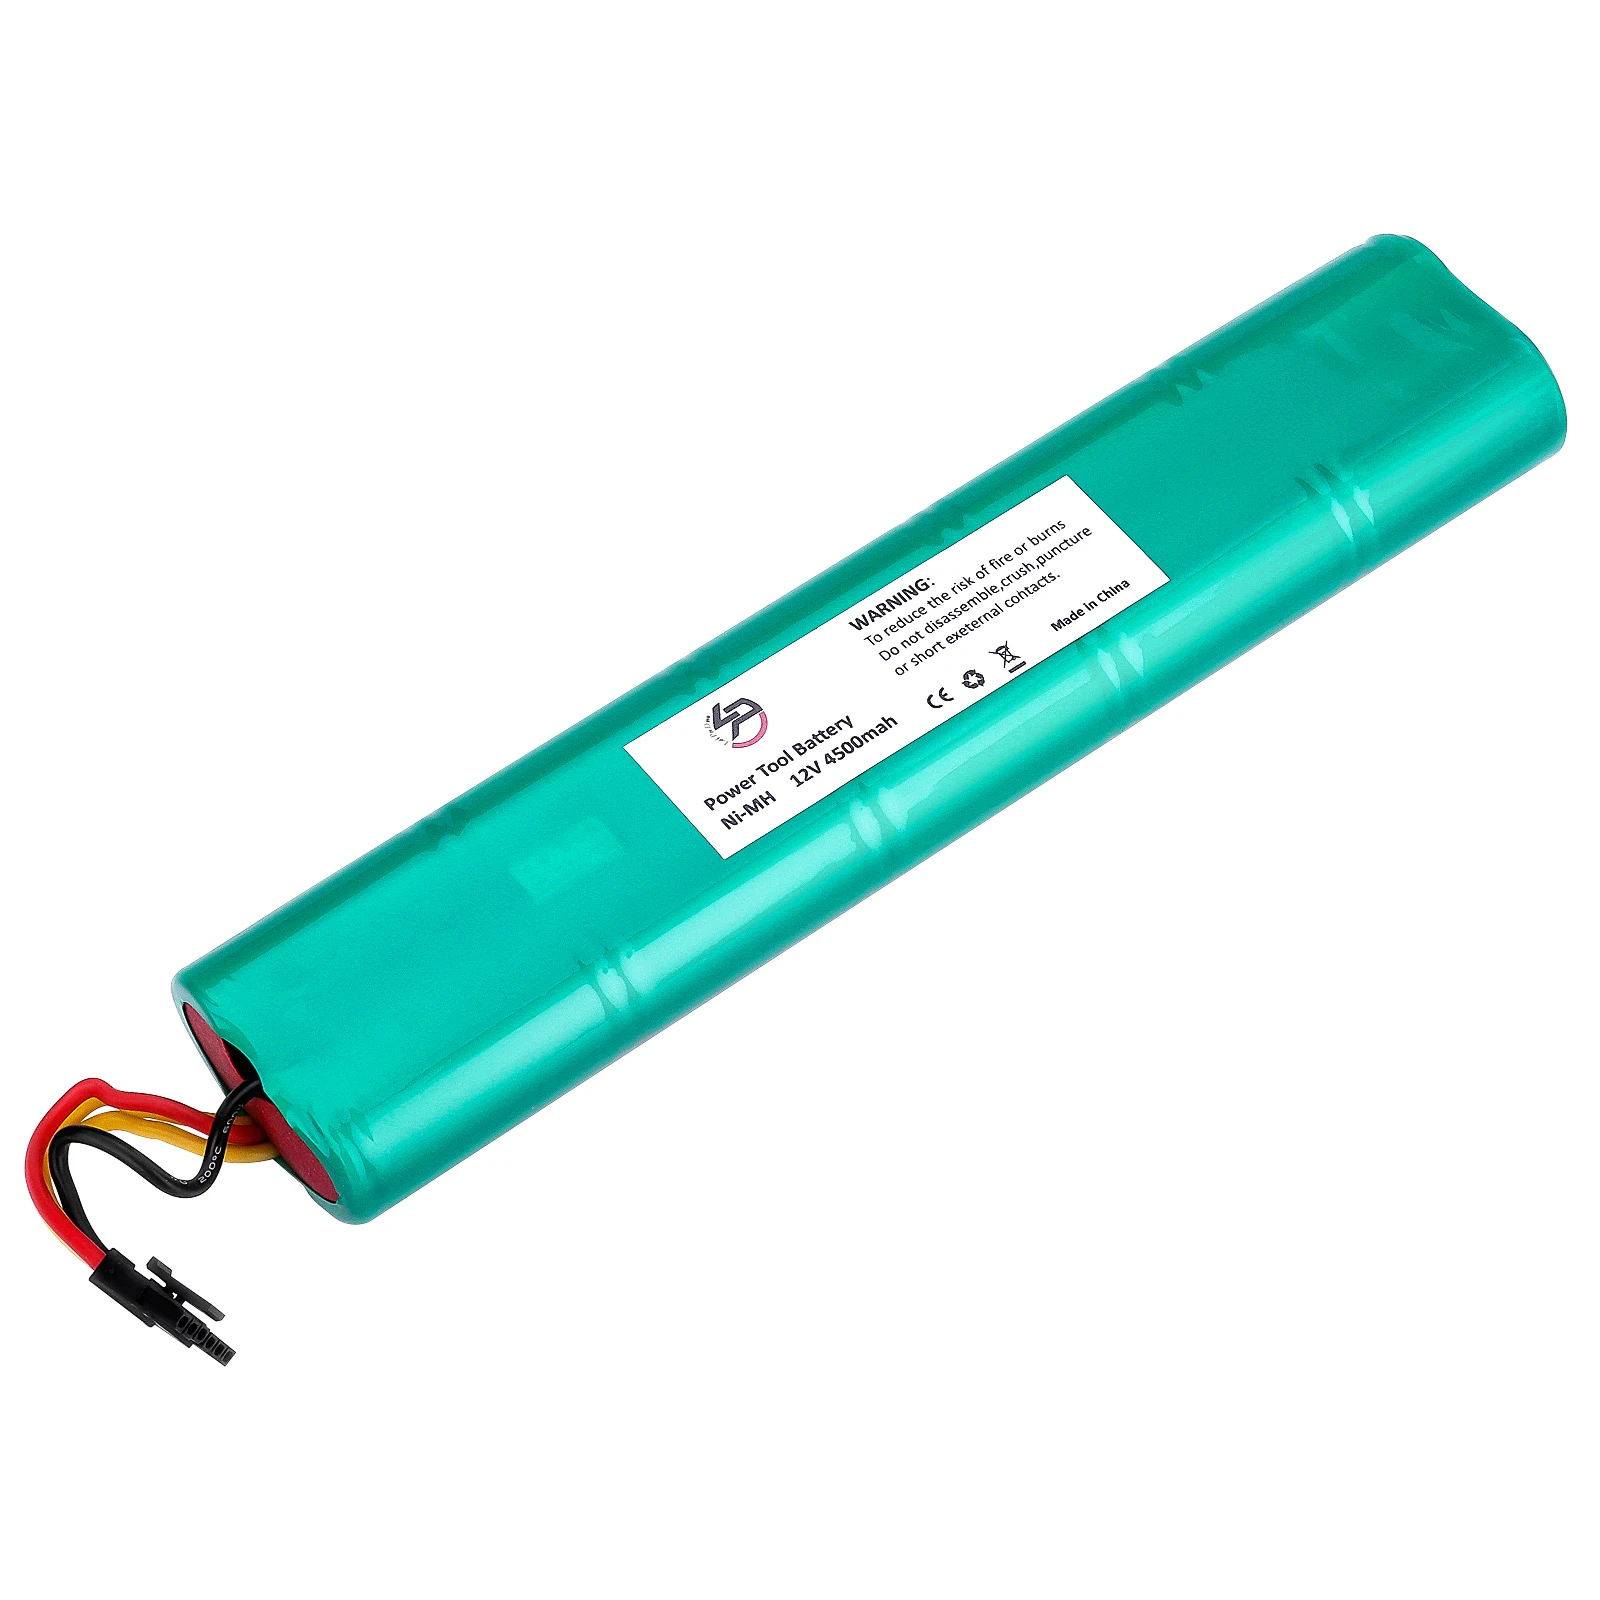 

12V 4500mAh NI-MH Battery for Neato Botvac 70E 75 80 85 D75 D80 D85 Vacuum Cleaners SC accessories Rechargeable Battery Upgraded